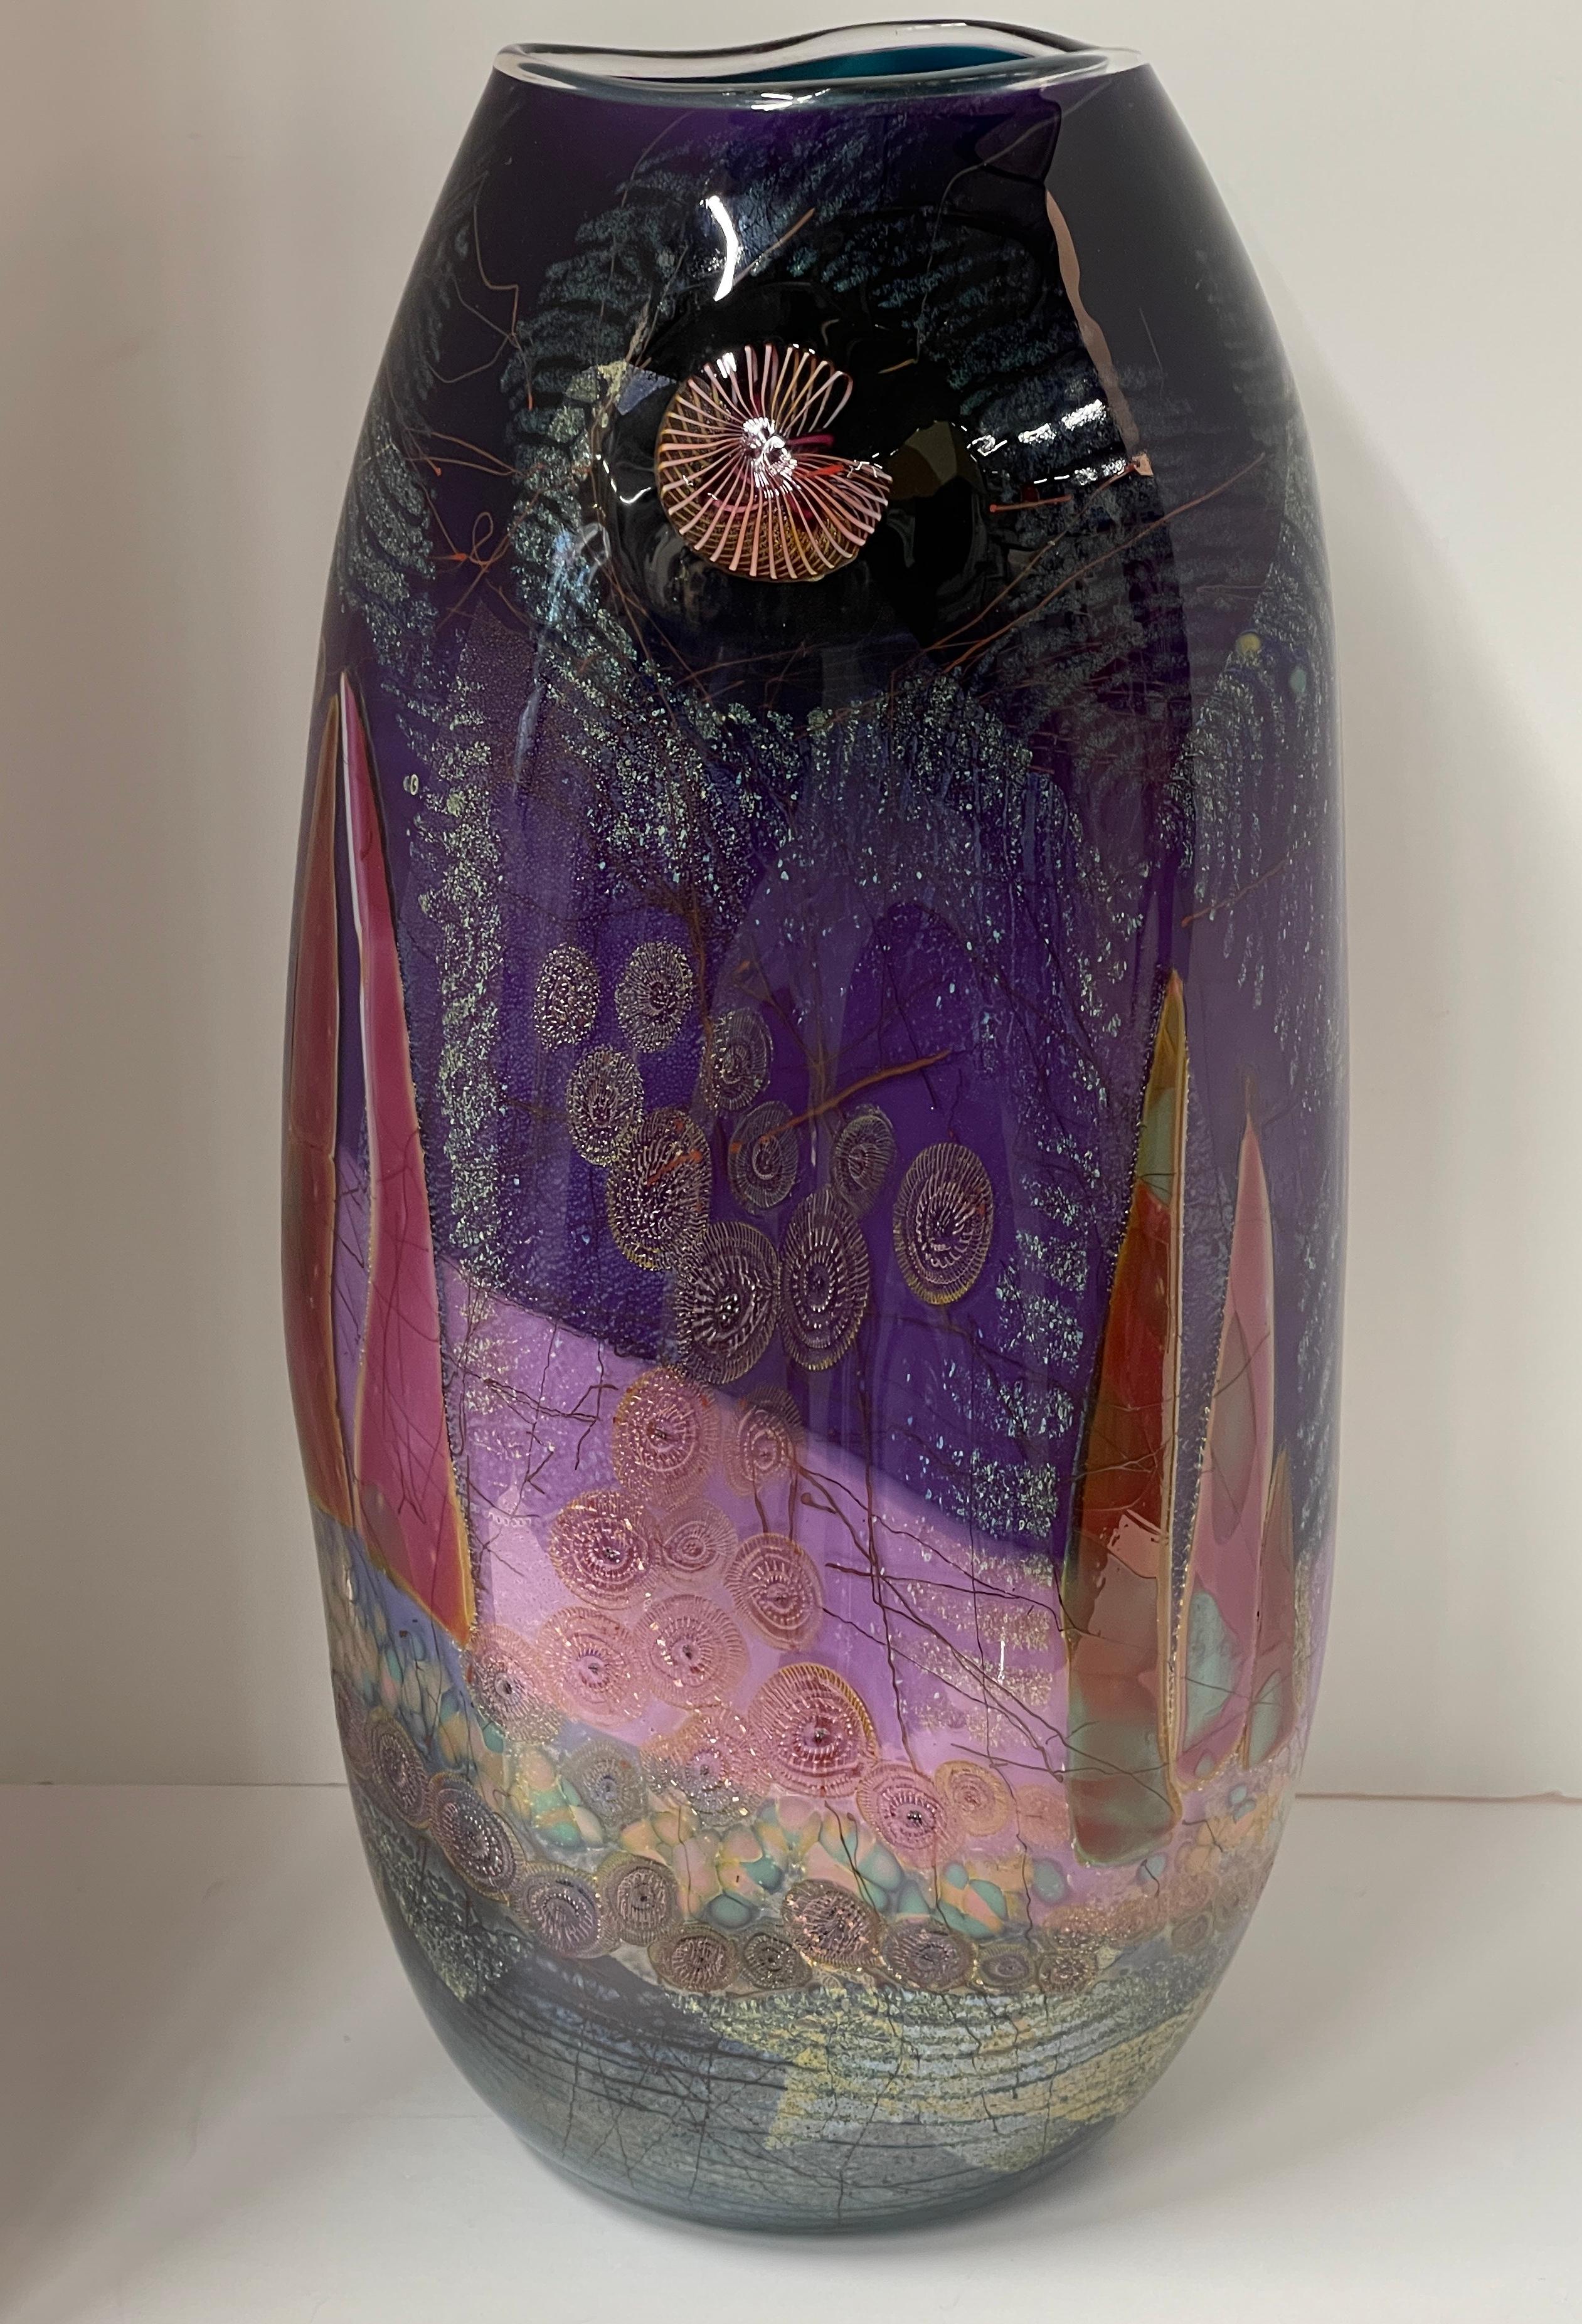 Beautiful art glass vase by the noted Oregon artist Chris Hawthorne. Great detail and color. In good condition.